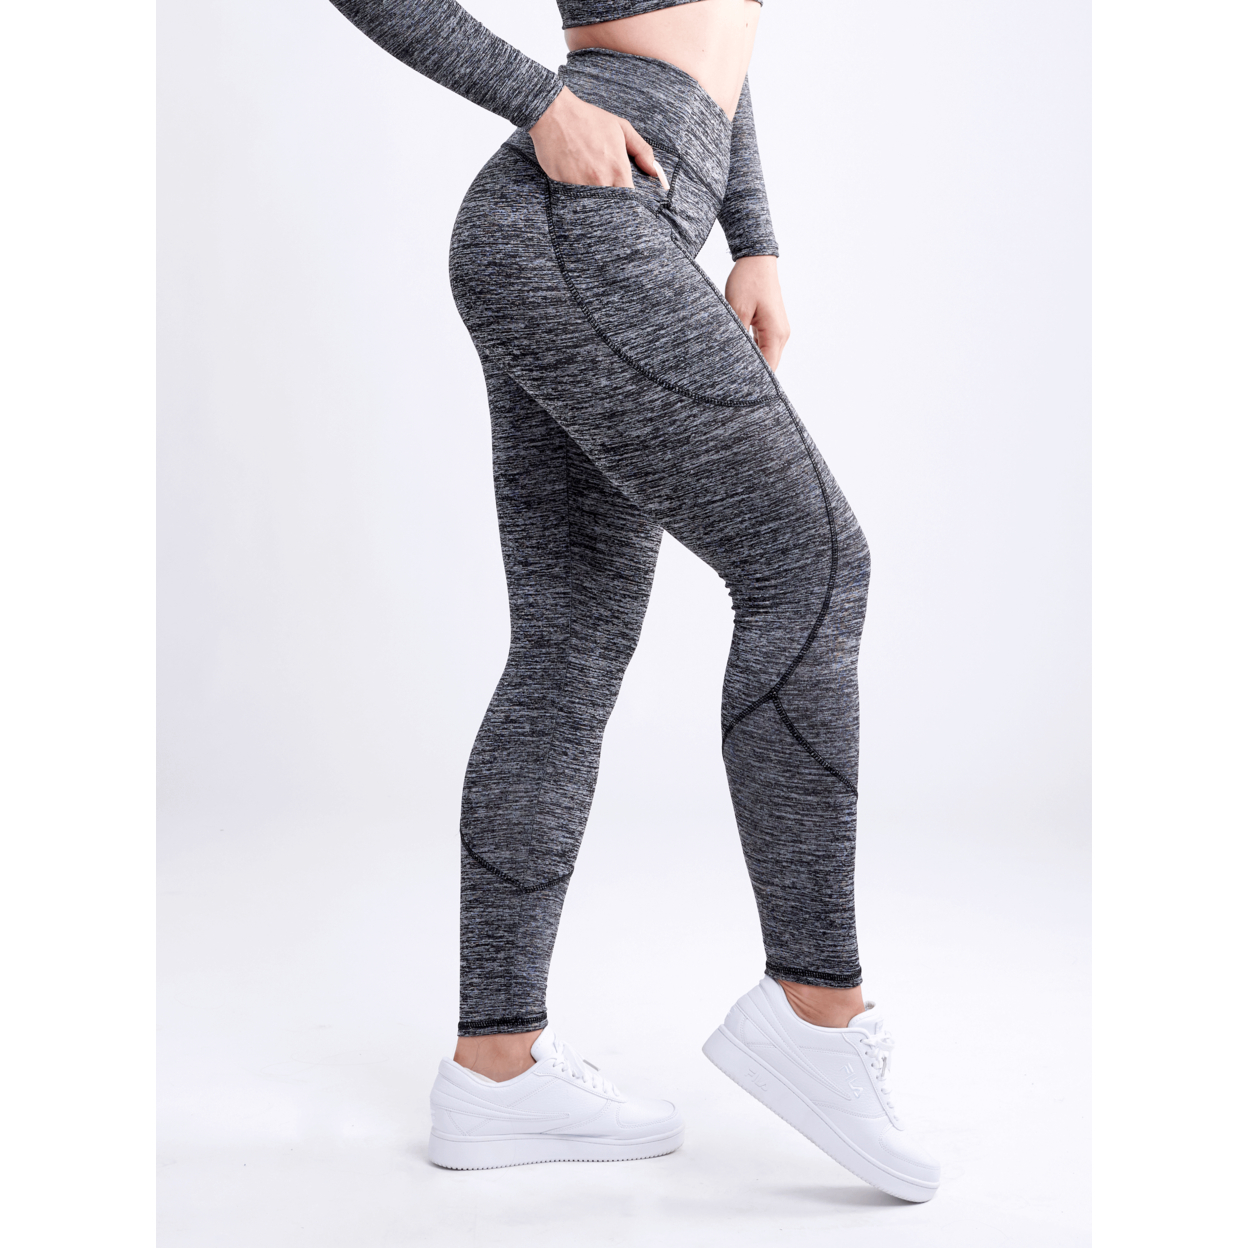 High-Waisted Classic Gym Leggings With Side Pockets - Grey, Small / Medium